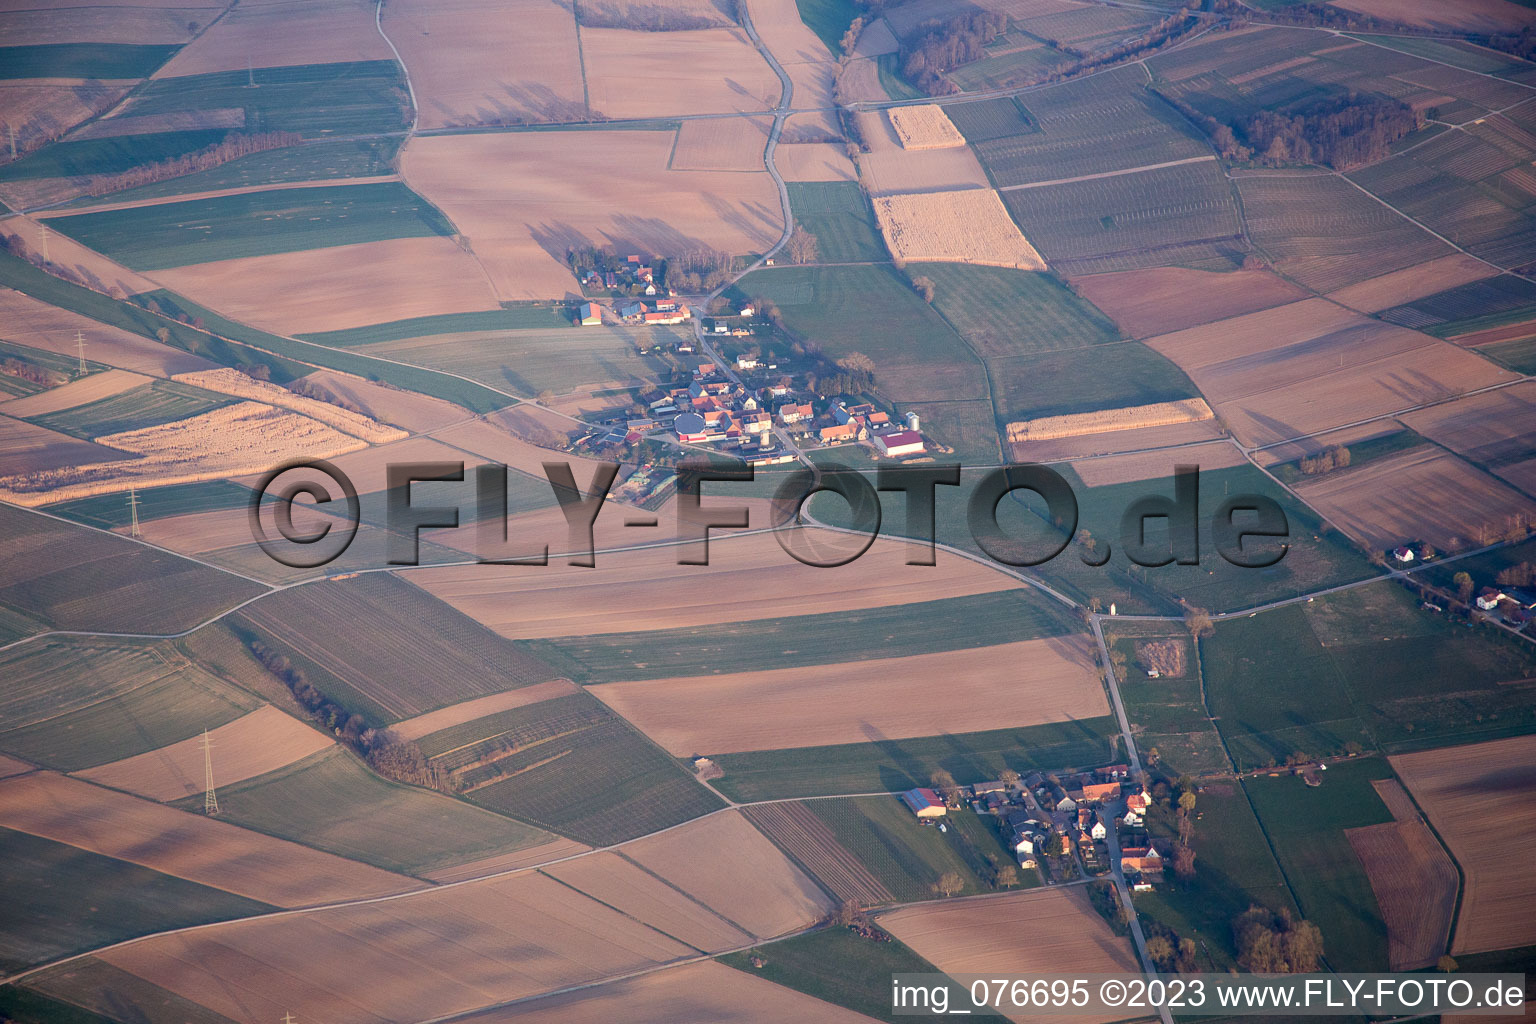 Aerial photograpy of Deutschhof in the state Rhineland-Palatinate, Germany